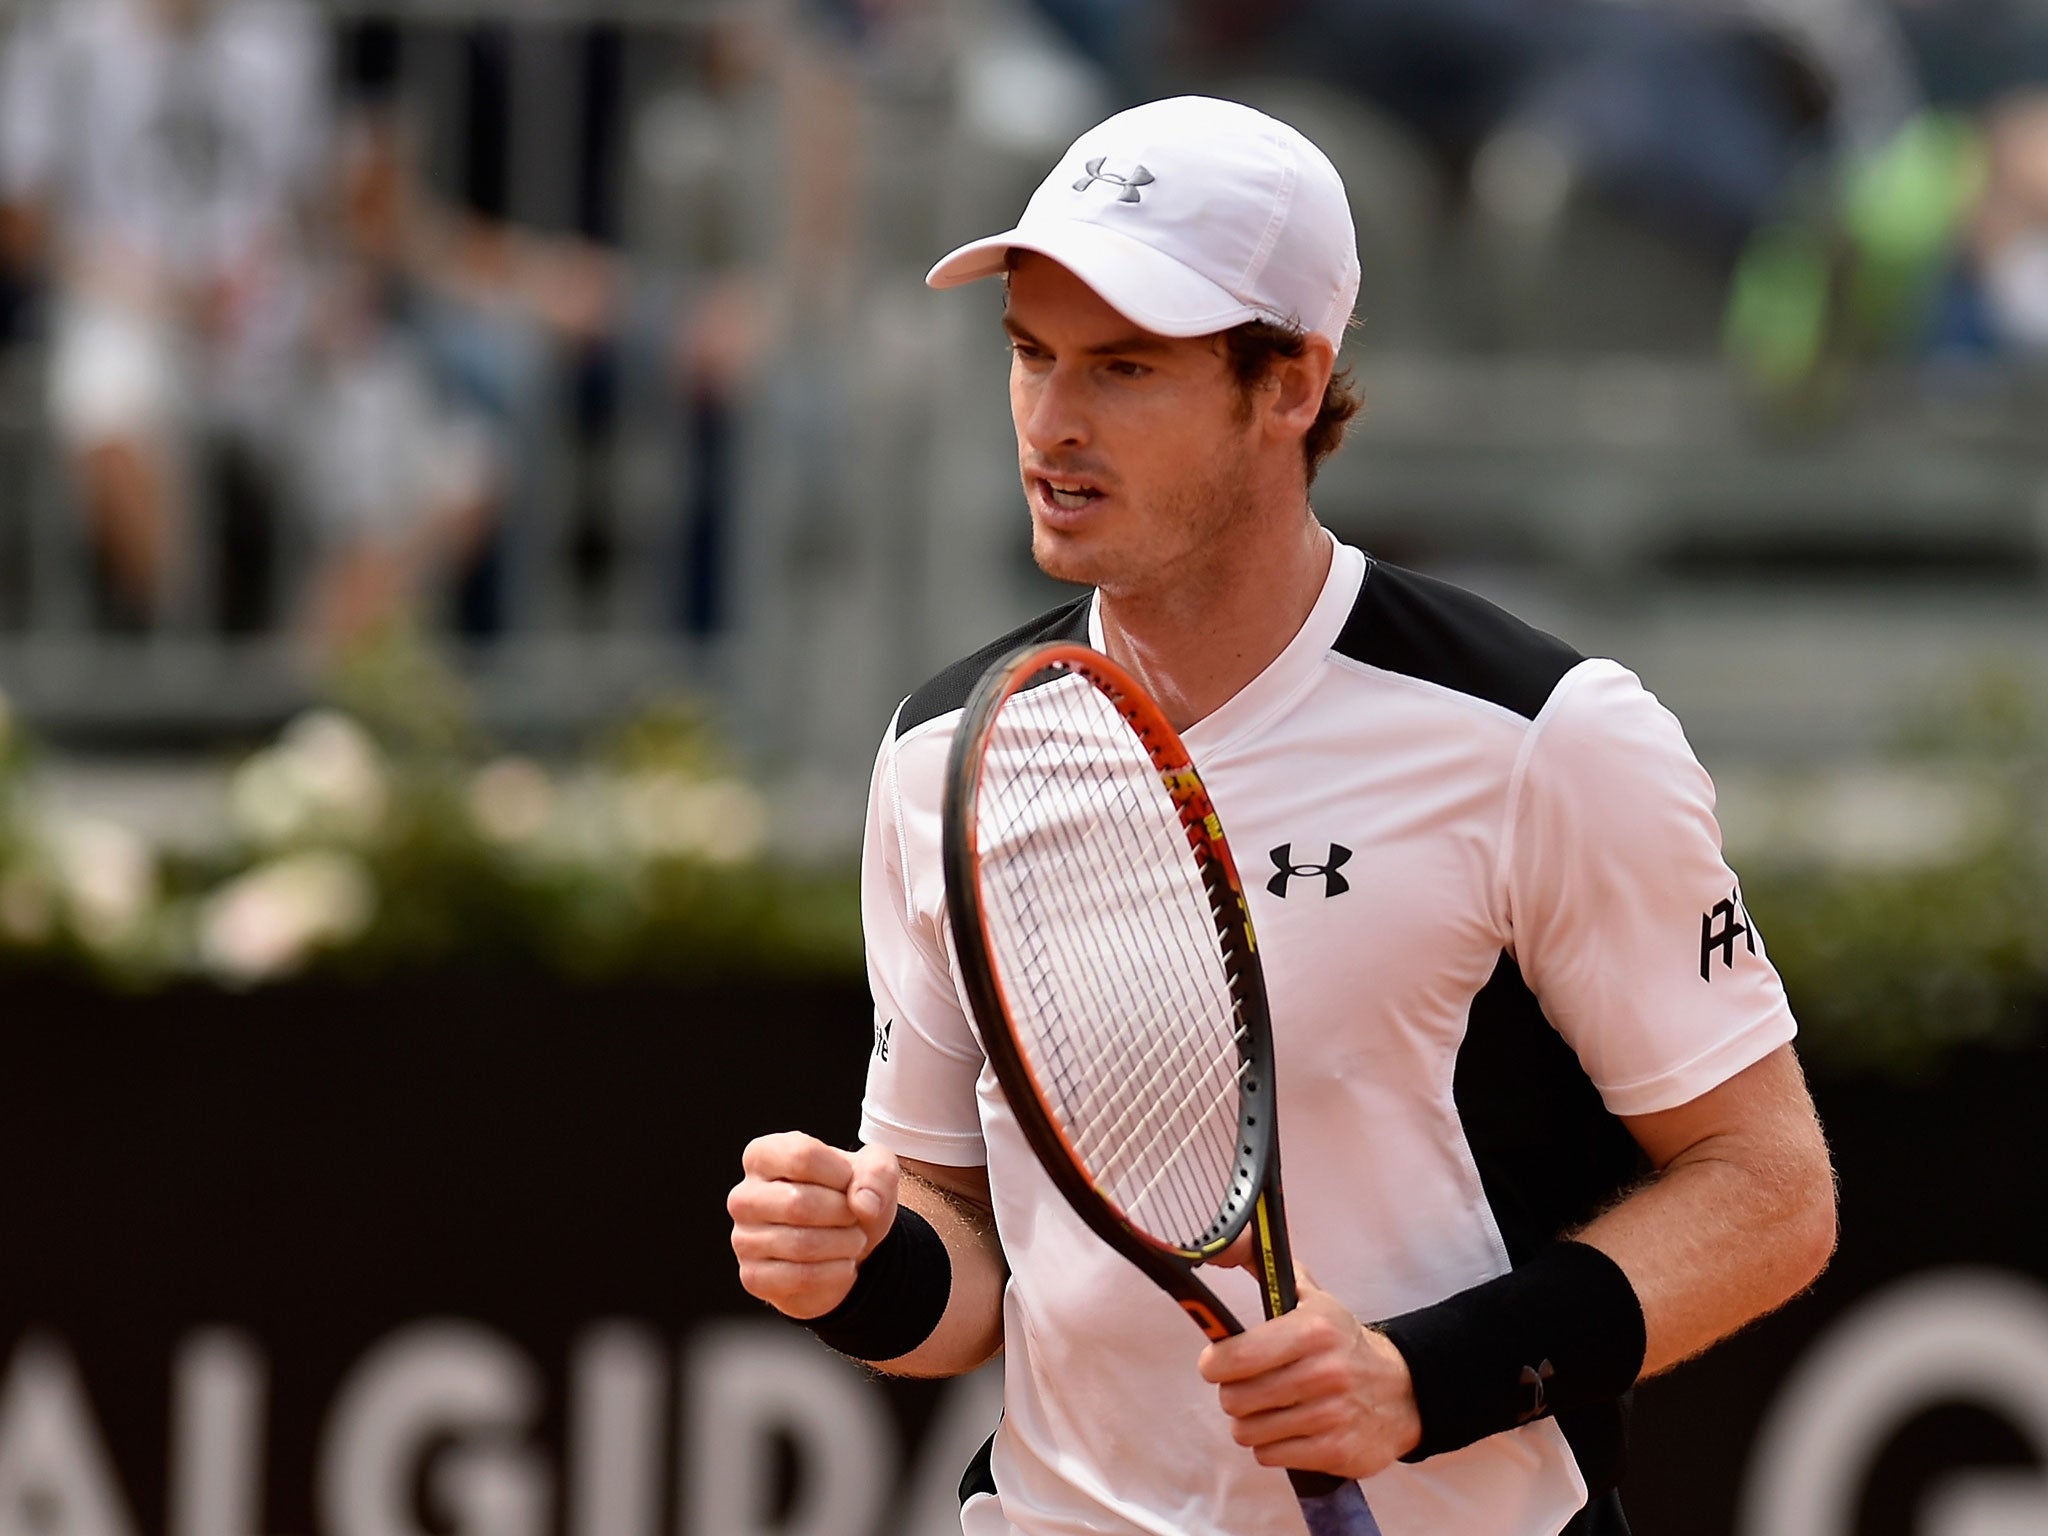 Andy Murray in Rome